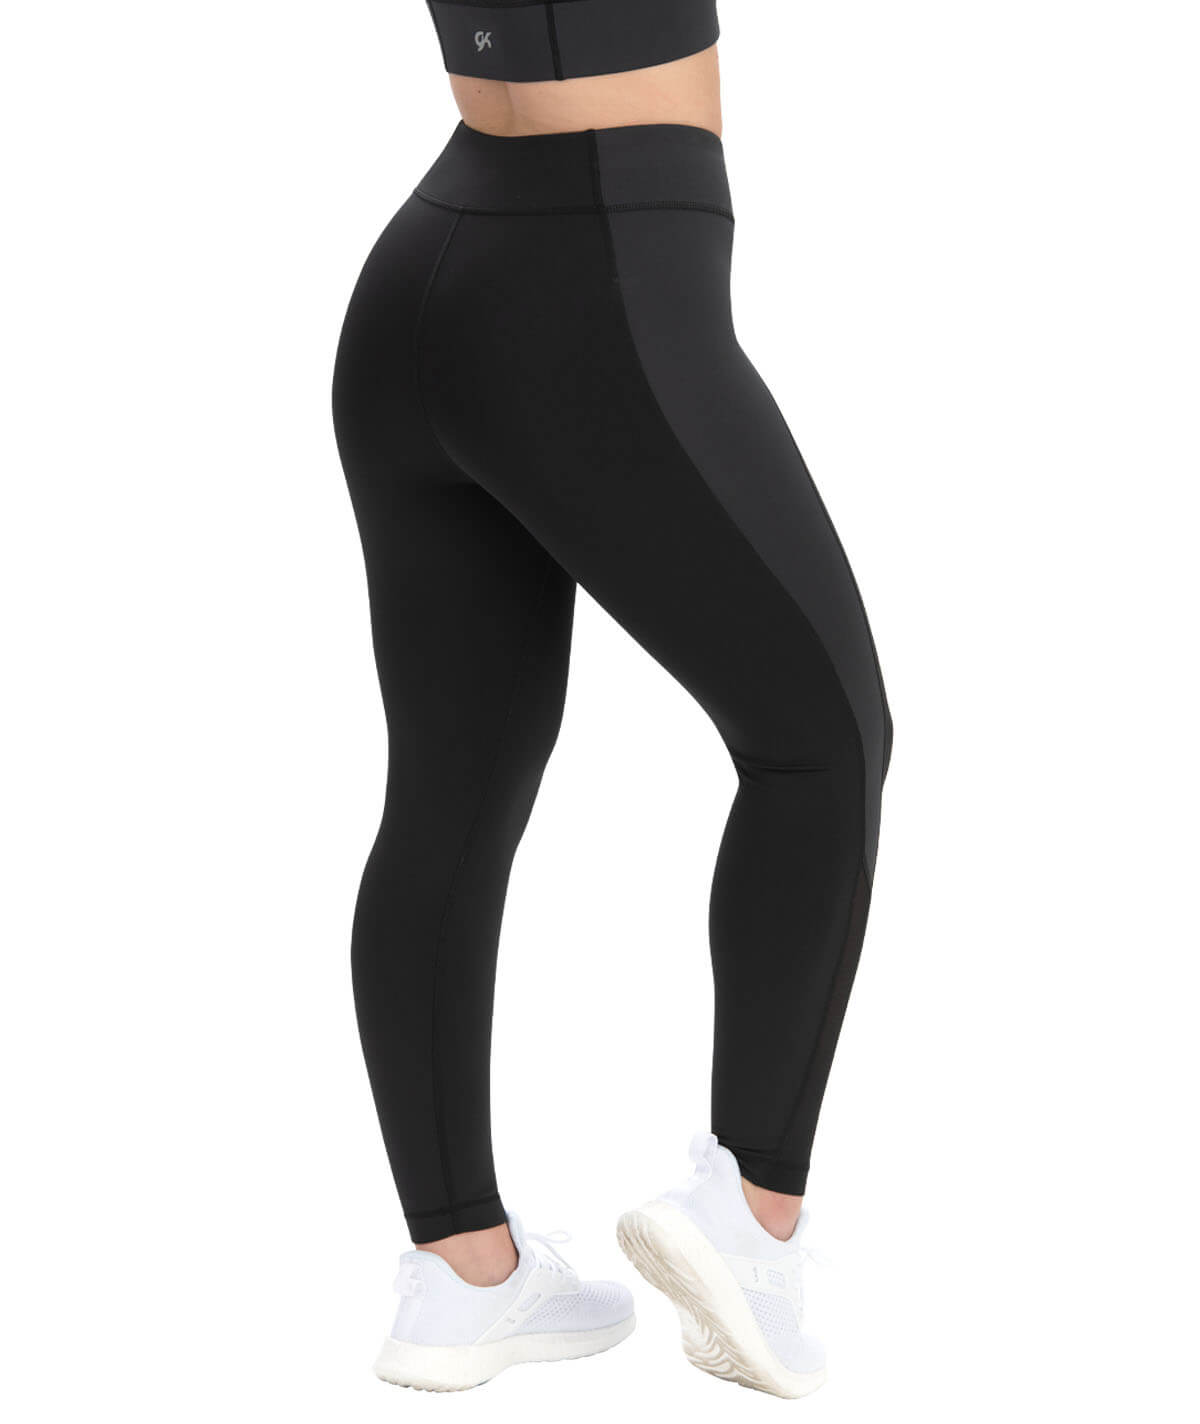 Cheerleading Black Legging The Perfect Everyday Classic Tights for Athletic Girls and Women 